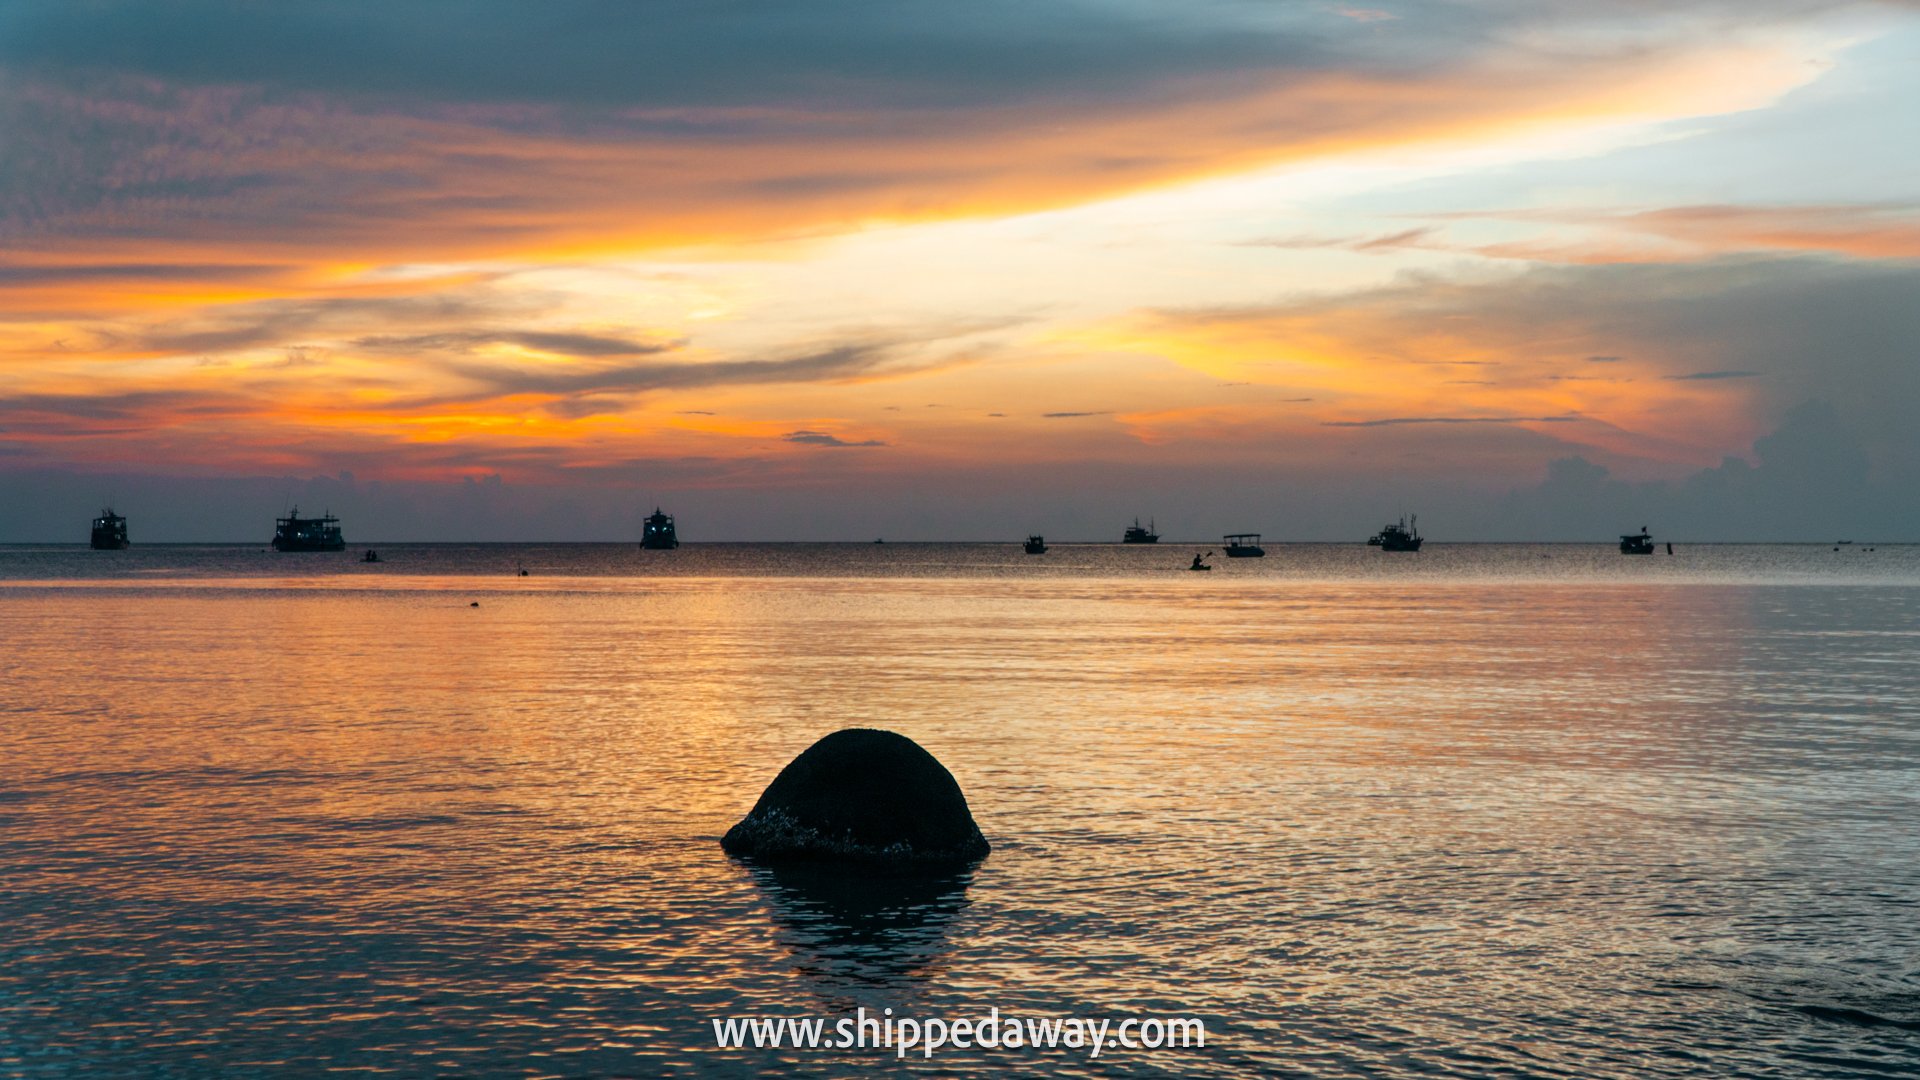 Sunset with diving boats seen in the distance, Sairee Beach, Koh Tao, Thailand